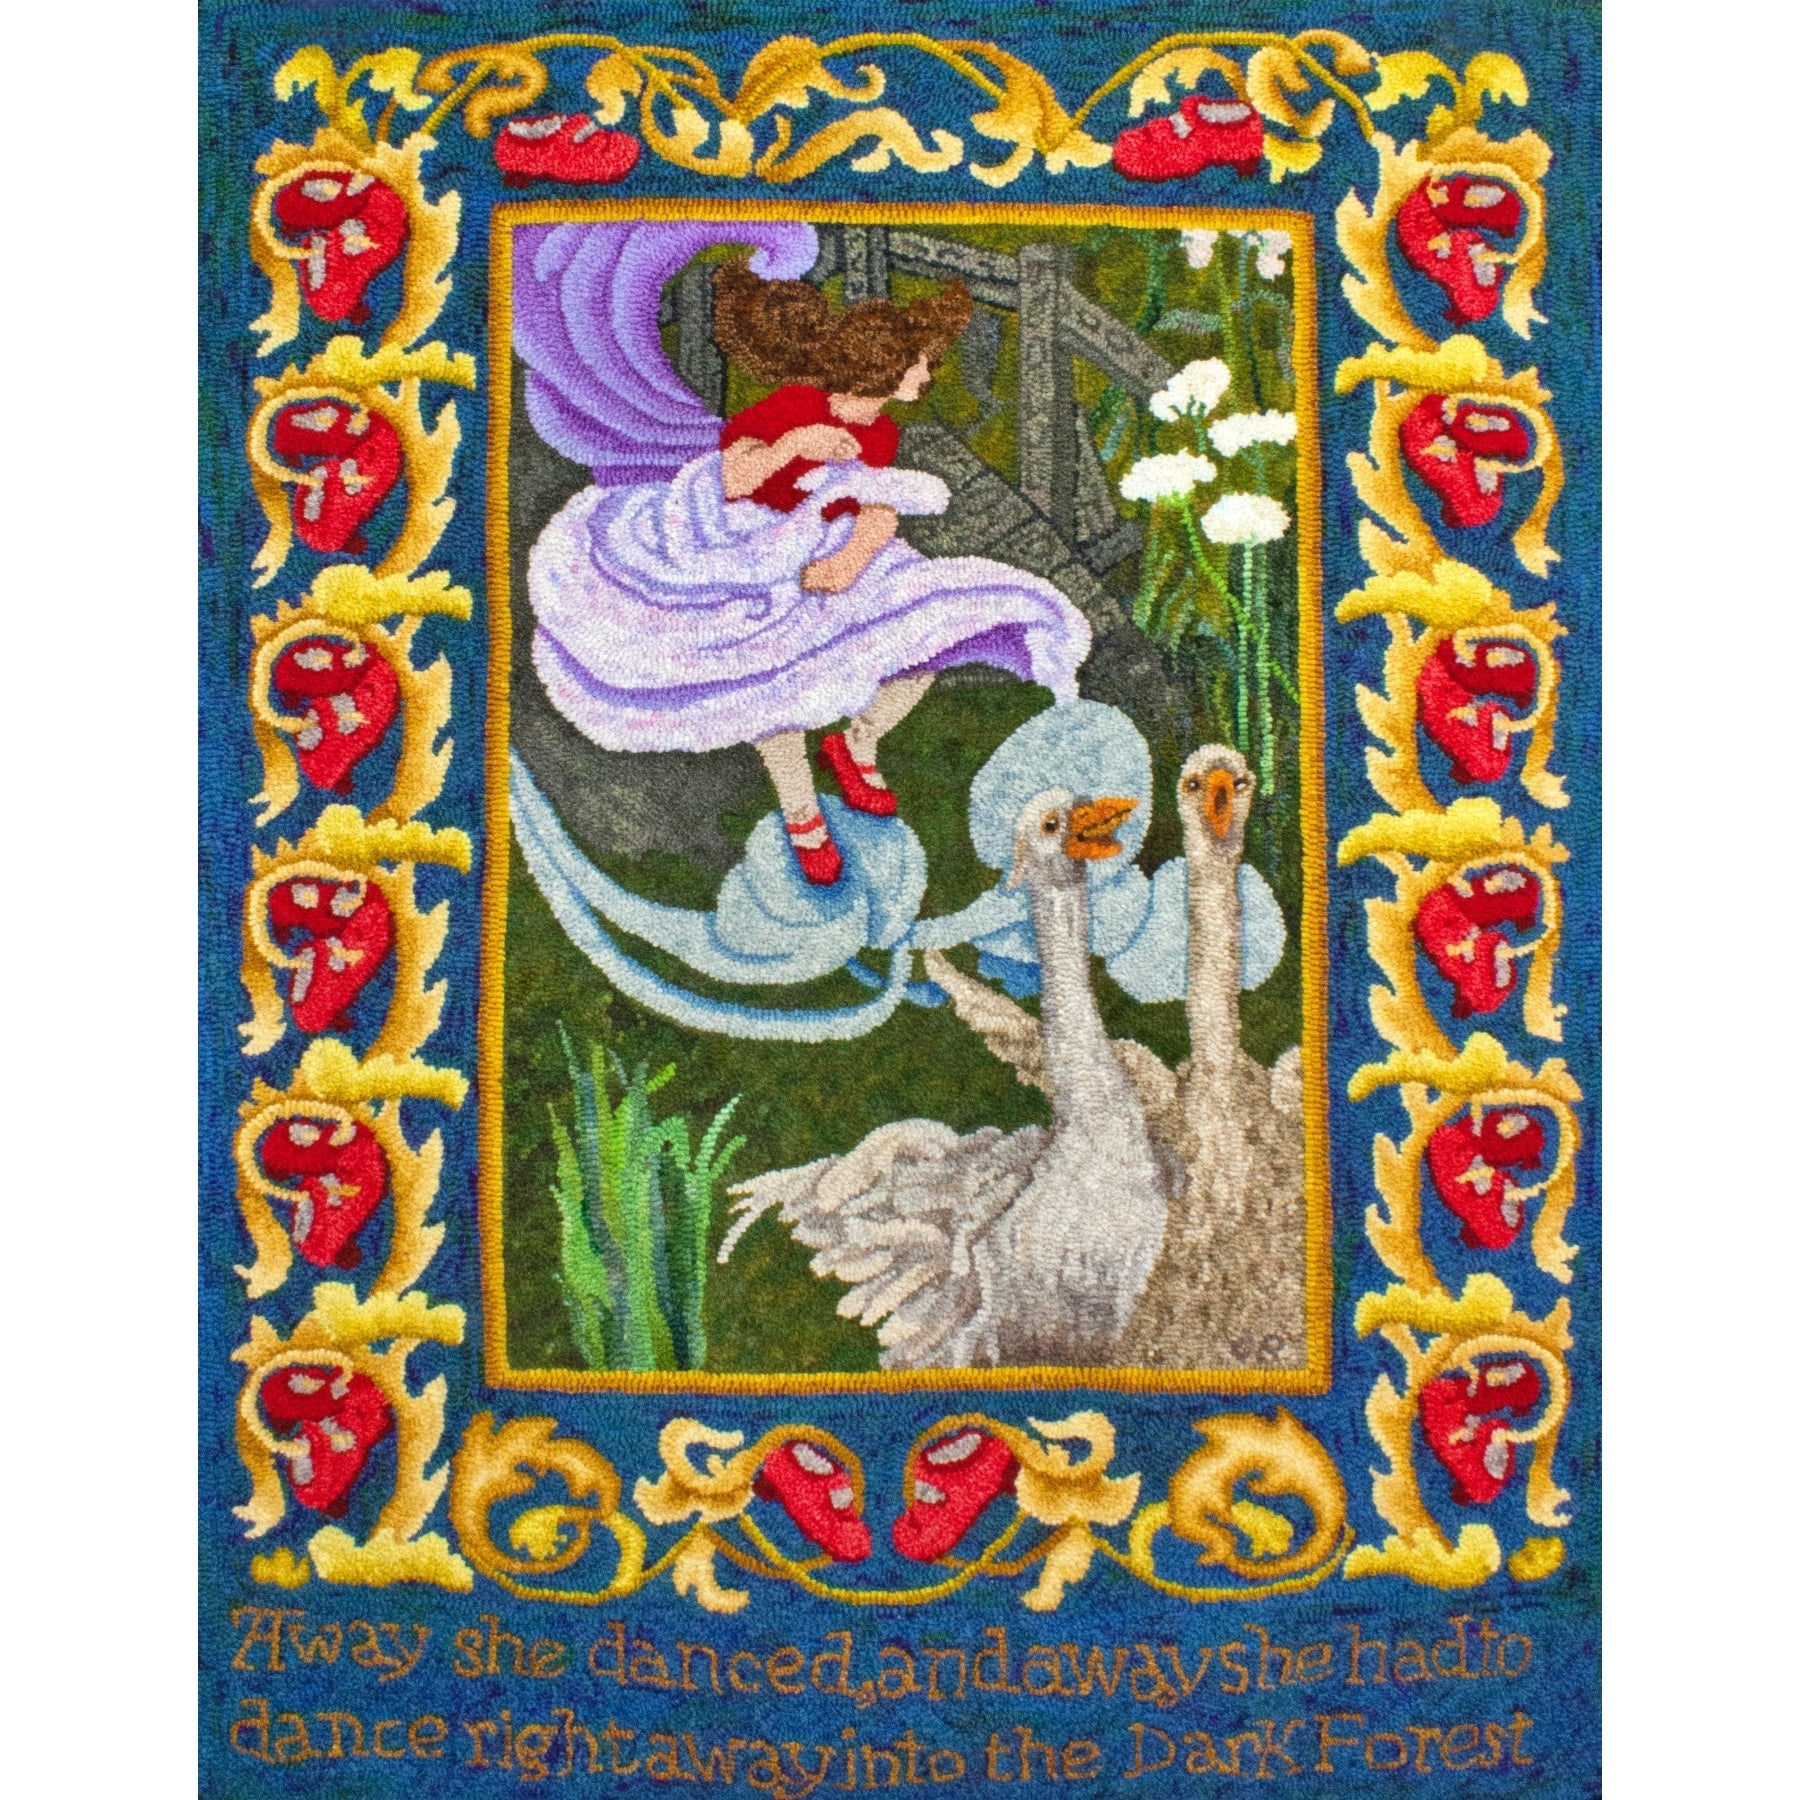 The Red Shoes Fairy Tales, ill. Charles Roninson, 1899, rug hooked by Vivily Powers